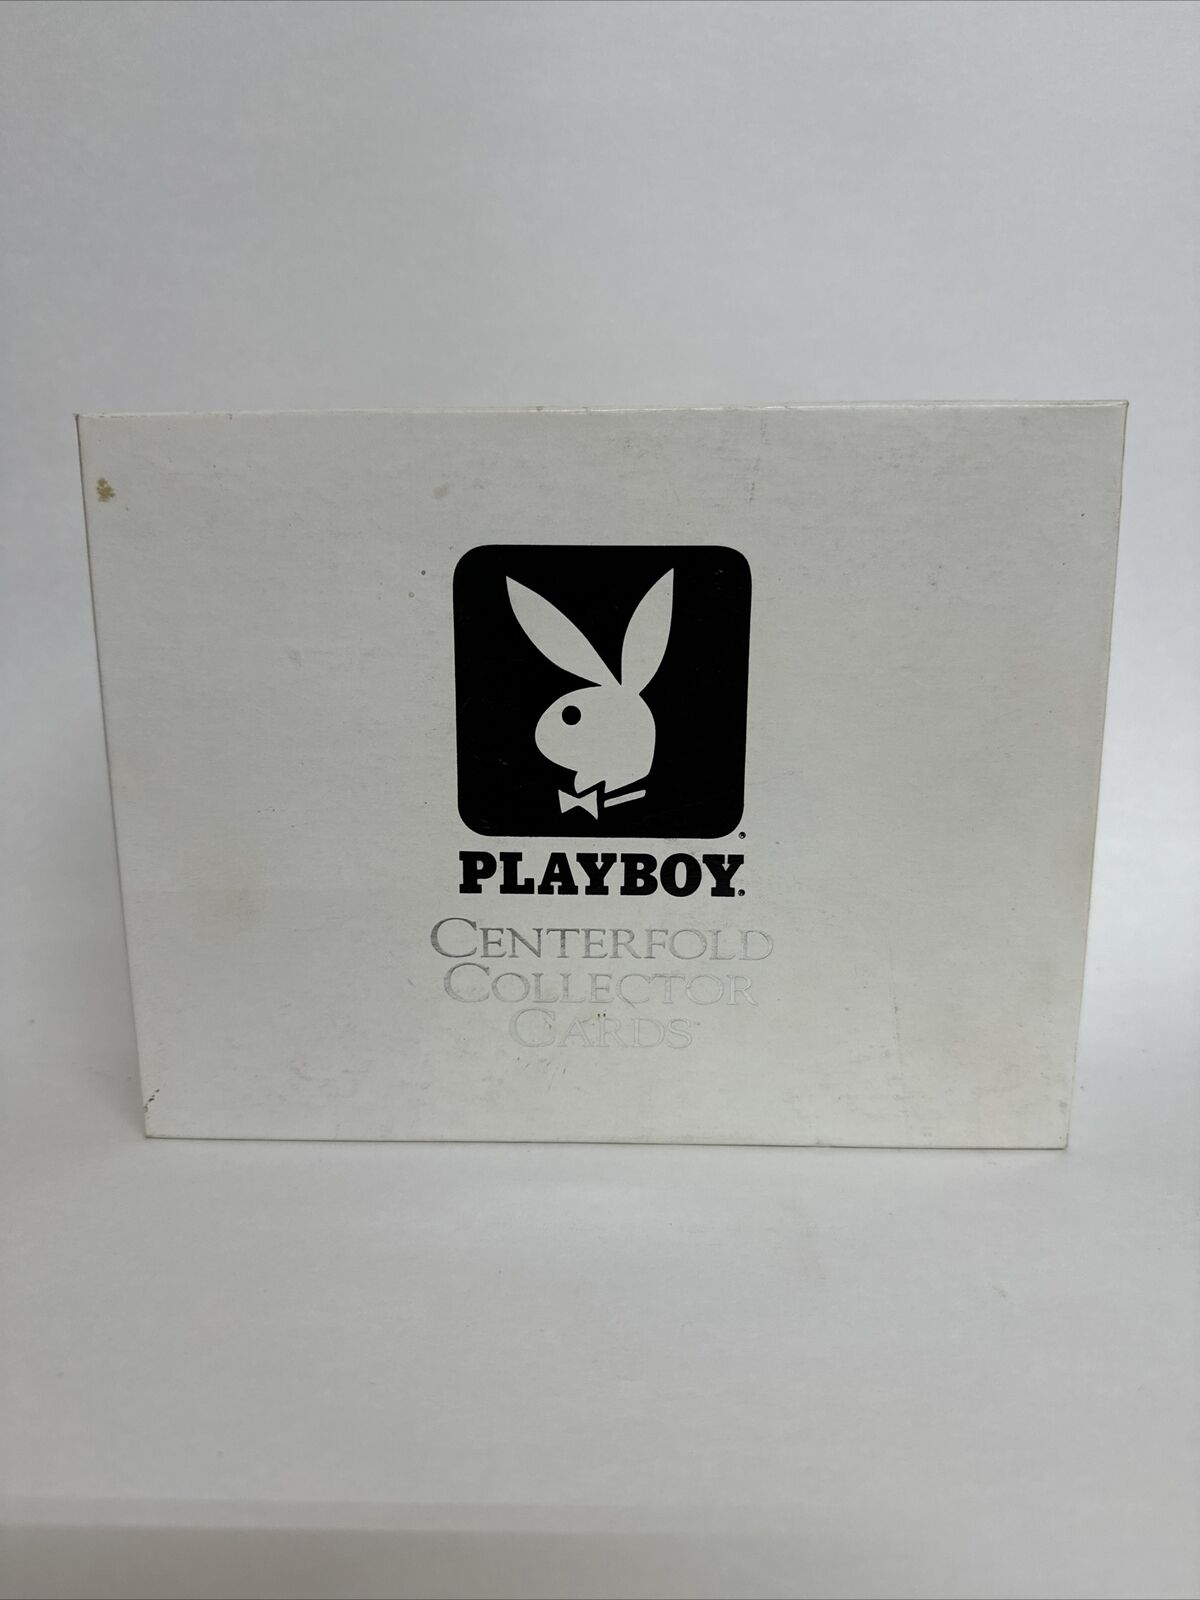 Playboy Centerfold Collector Cards January Edition and Box